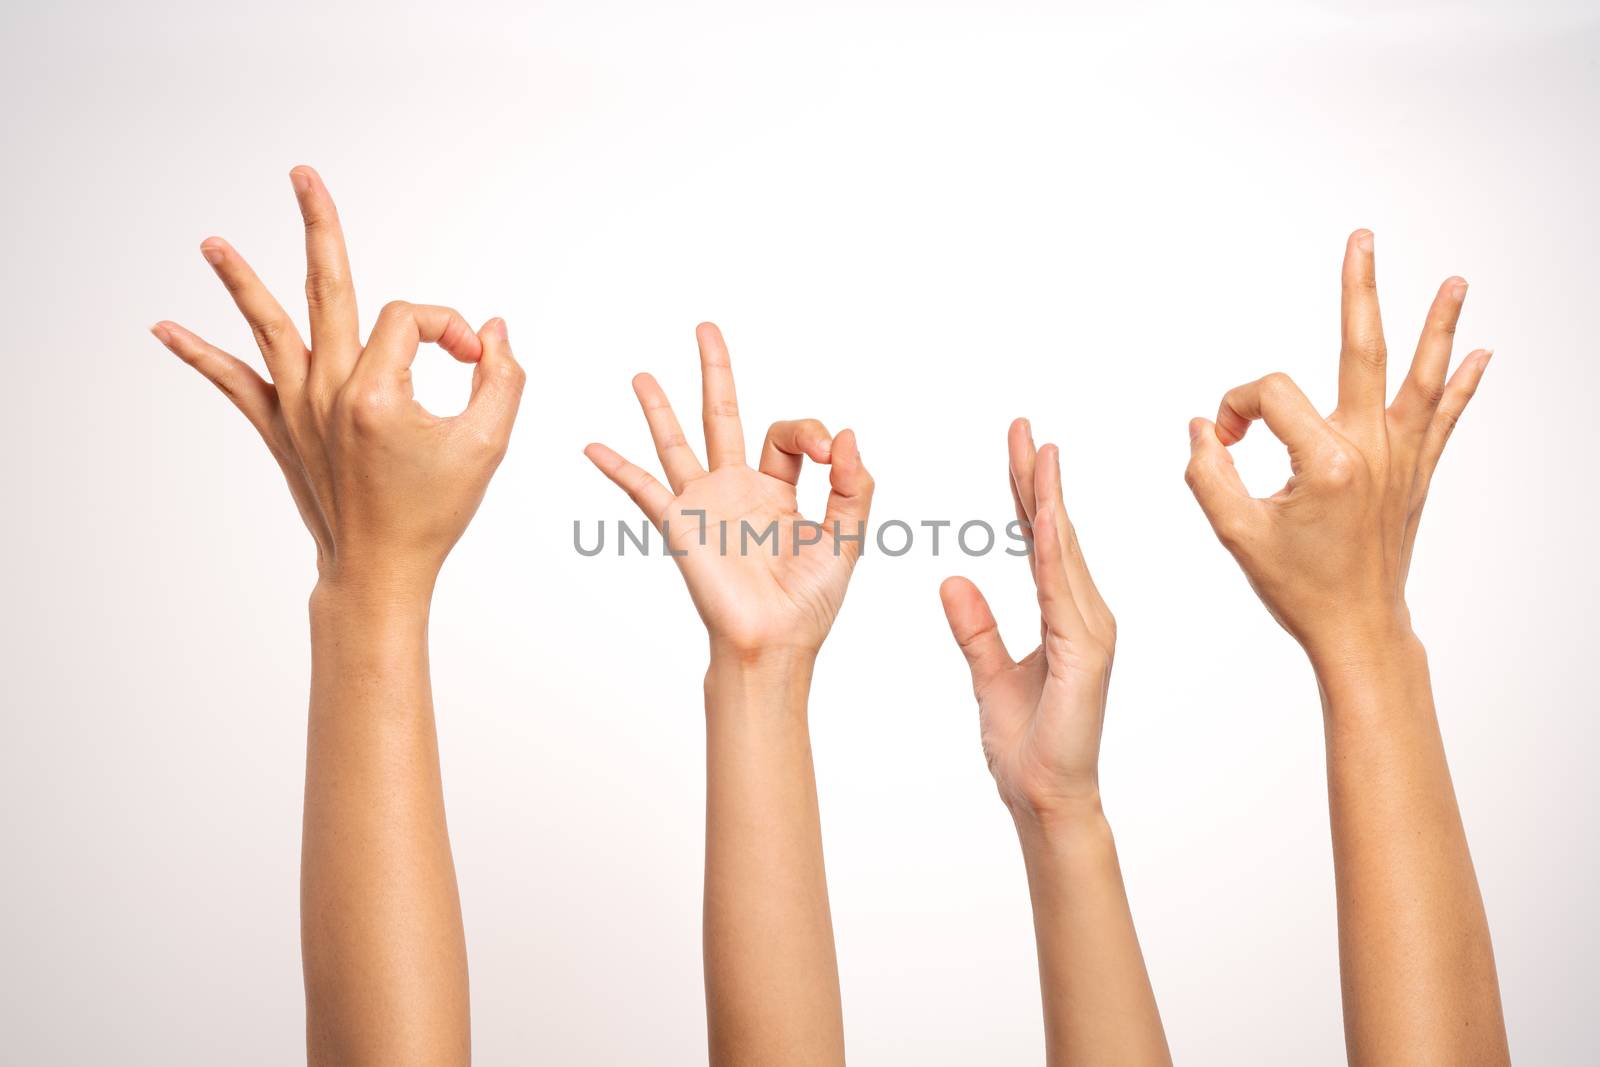 women hand OK sign and raise hand up gesturing on white background in four action